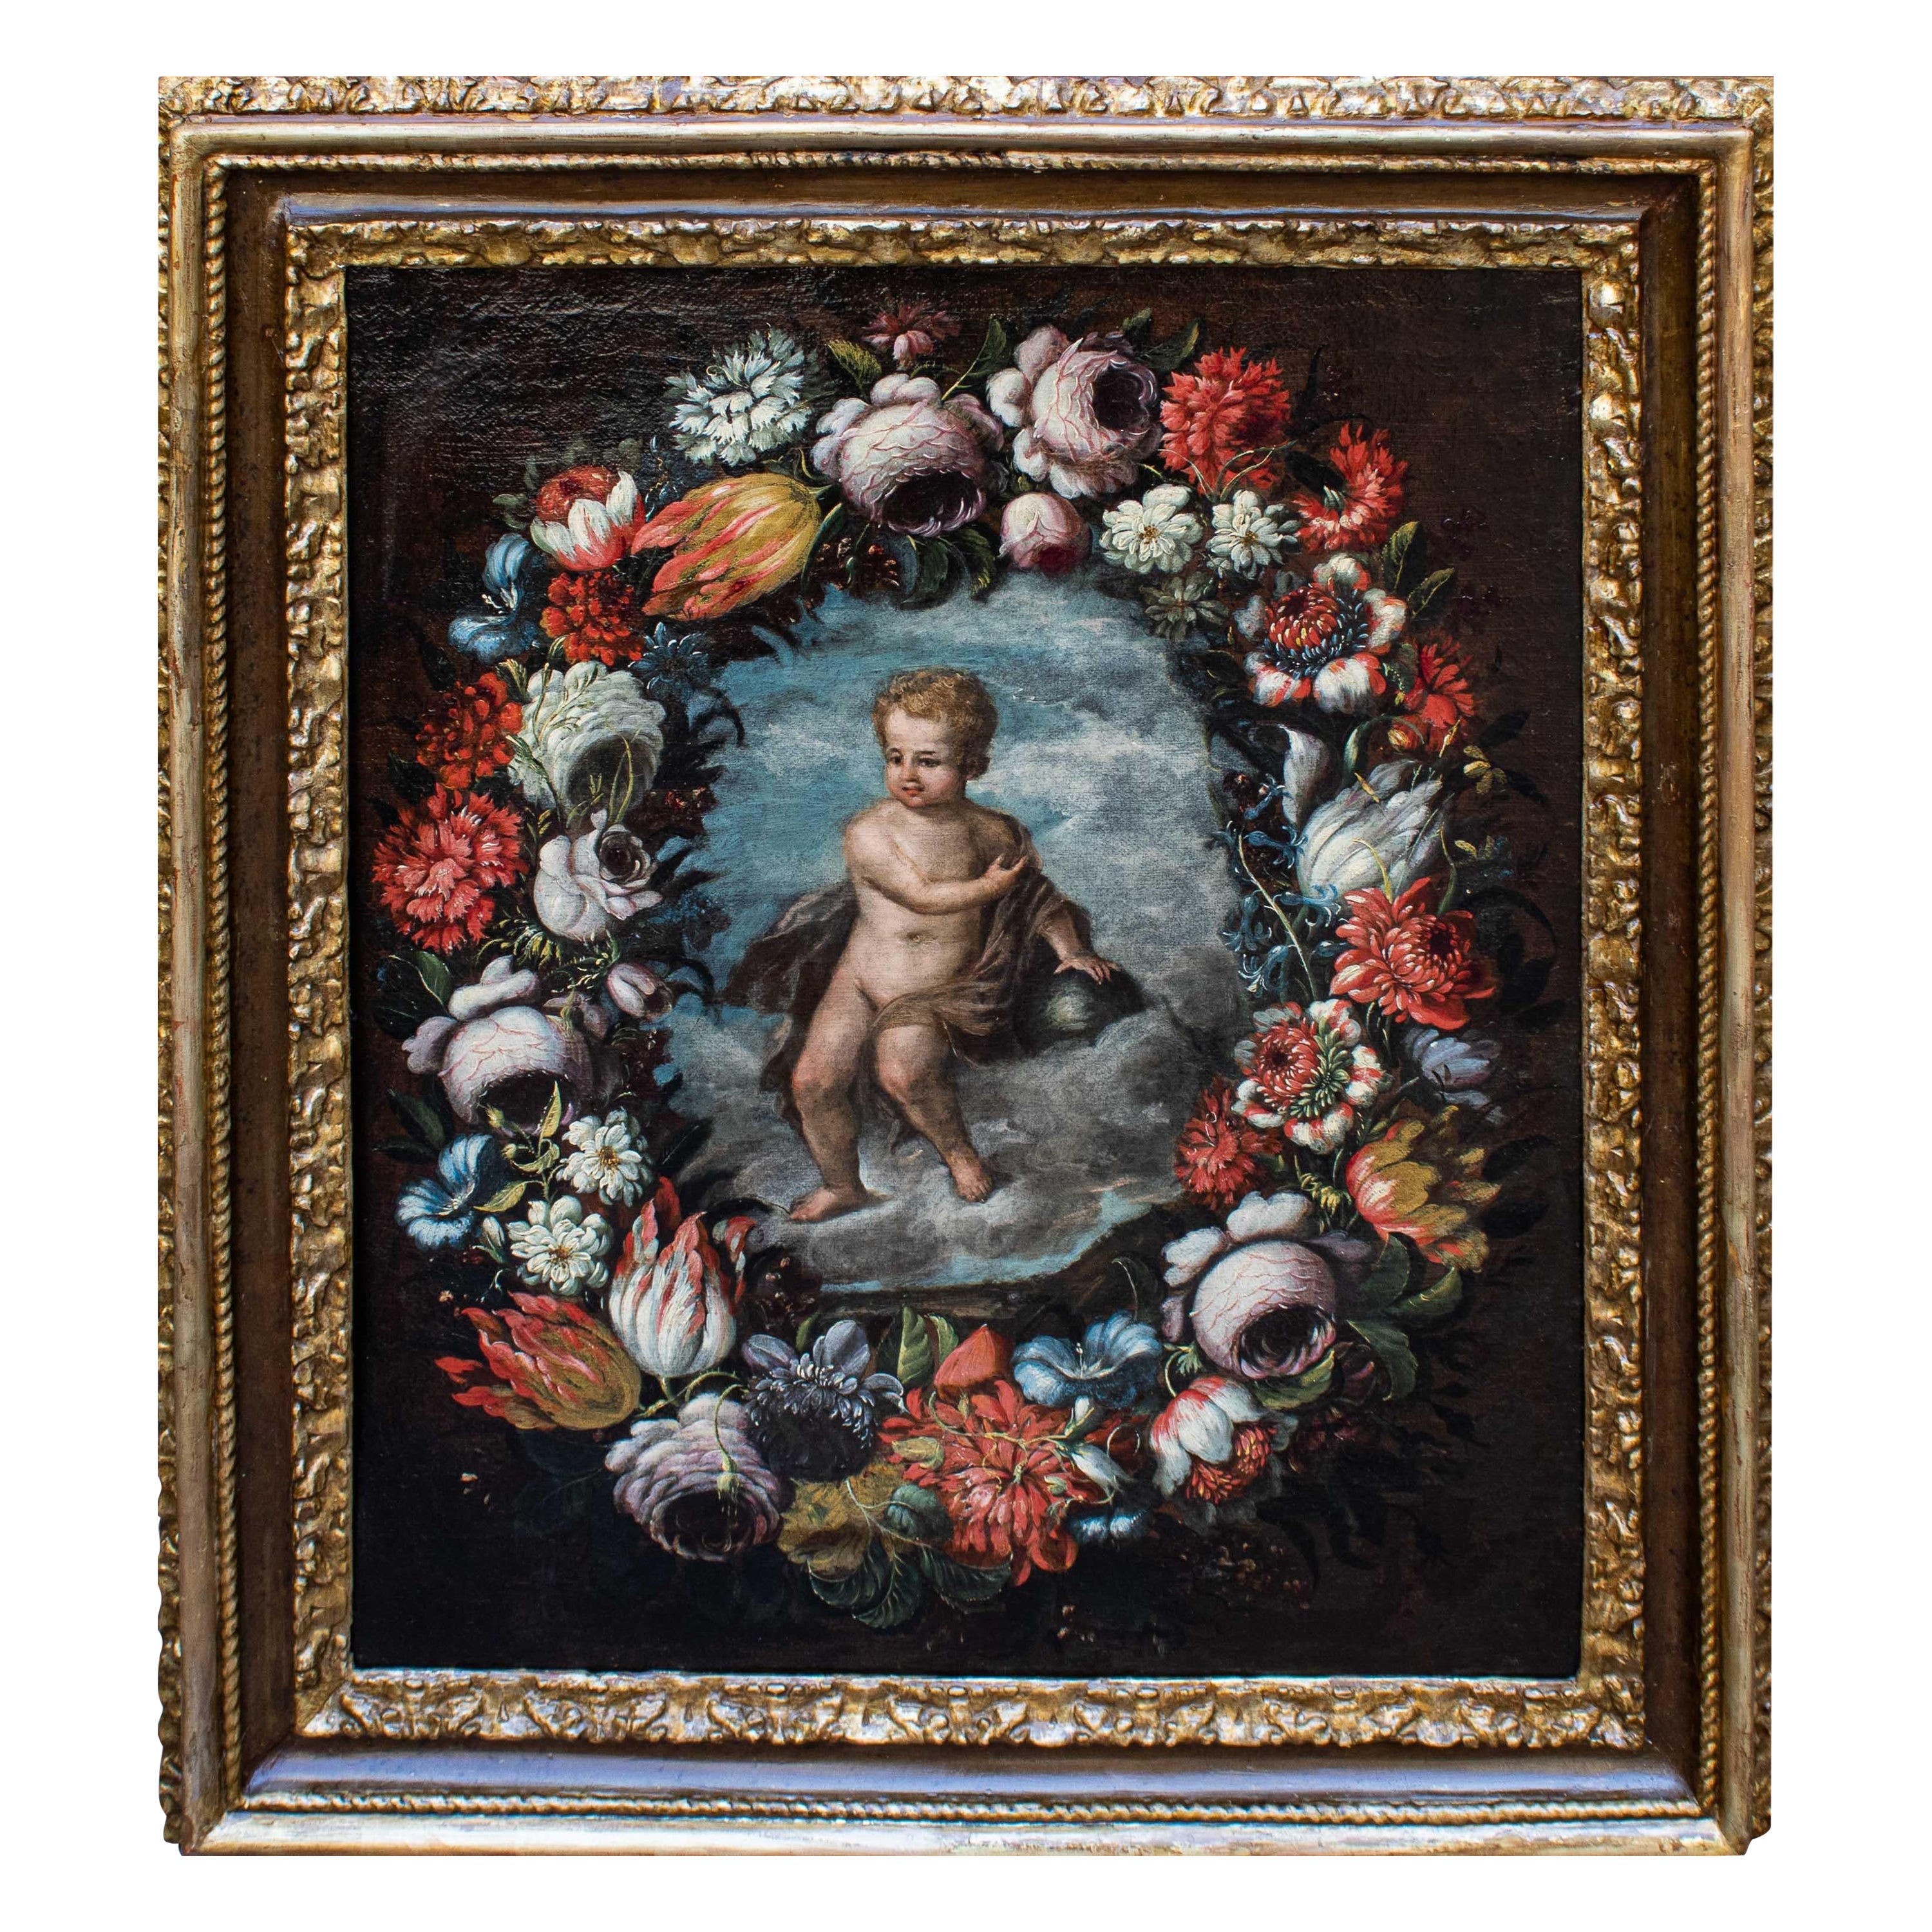 Oil on canvas Jesus child within garland of flowers 18th century